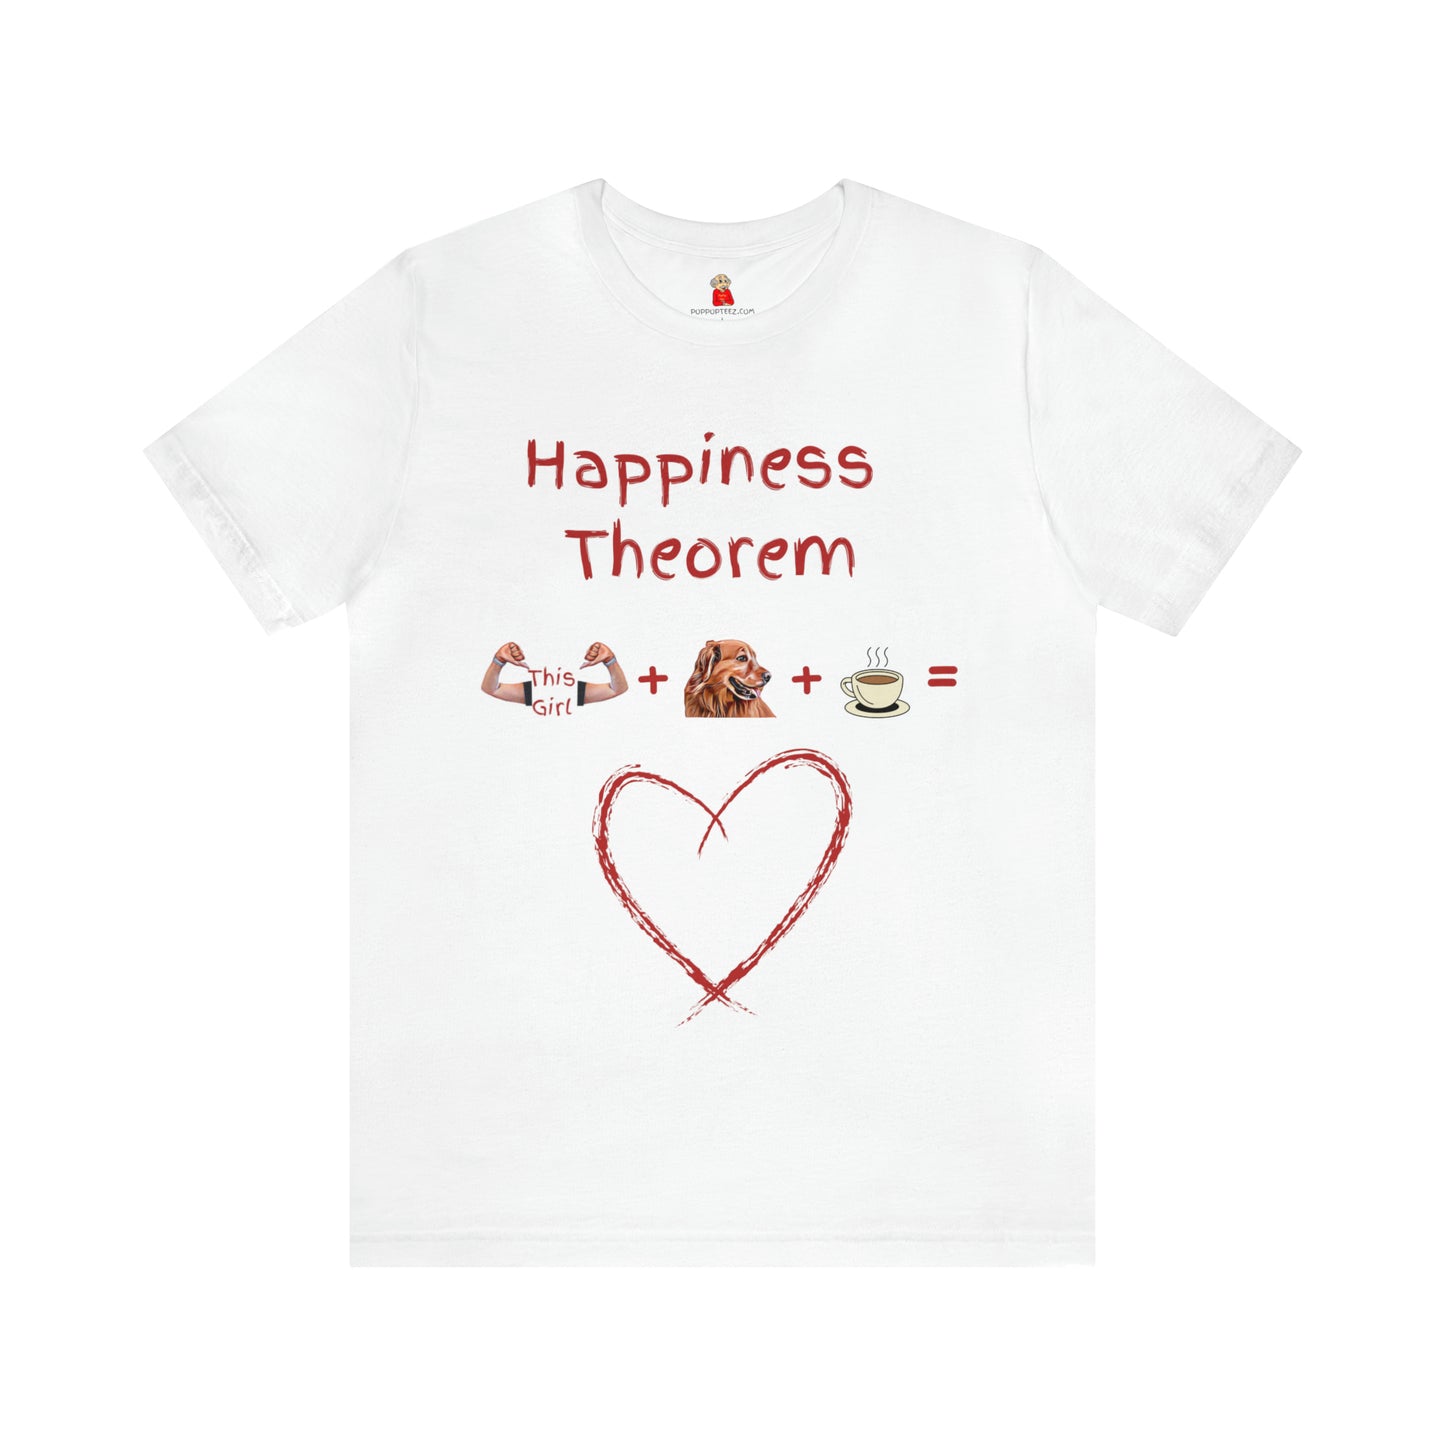 This Girl + Golden + Coffee = Happiness Unisex Jersey Tee